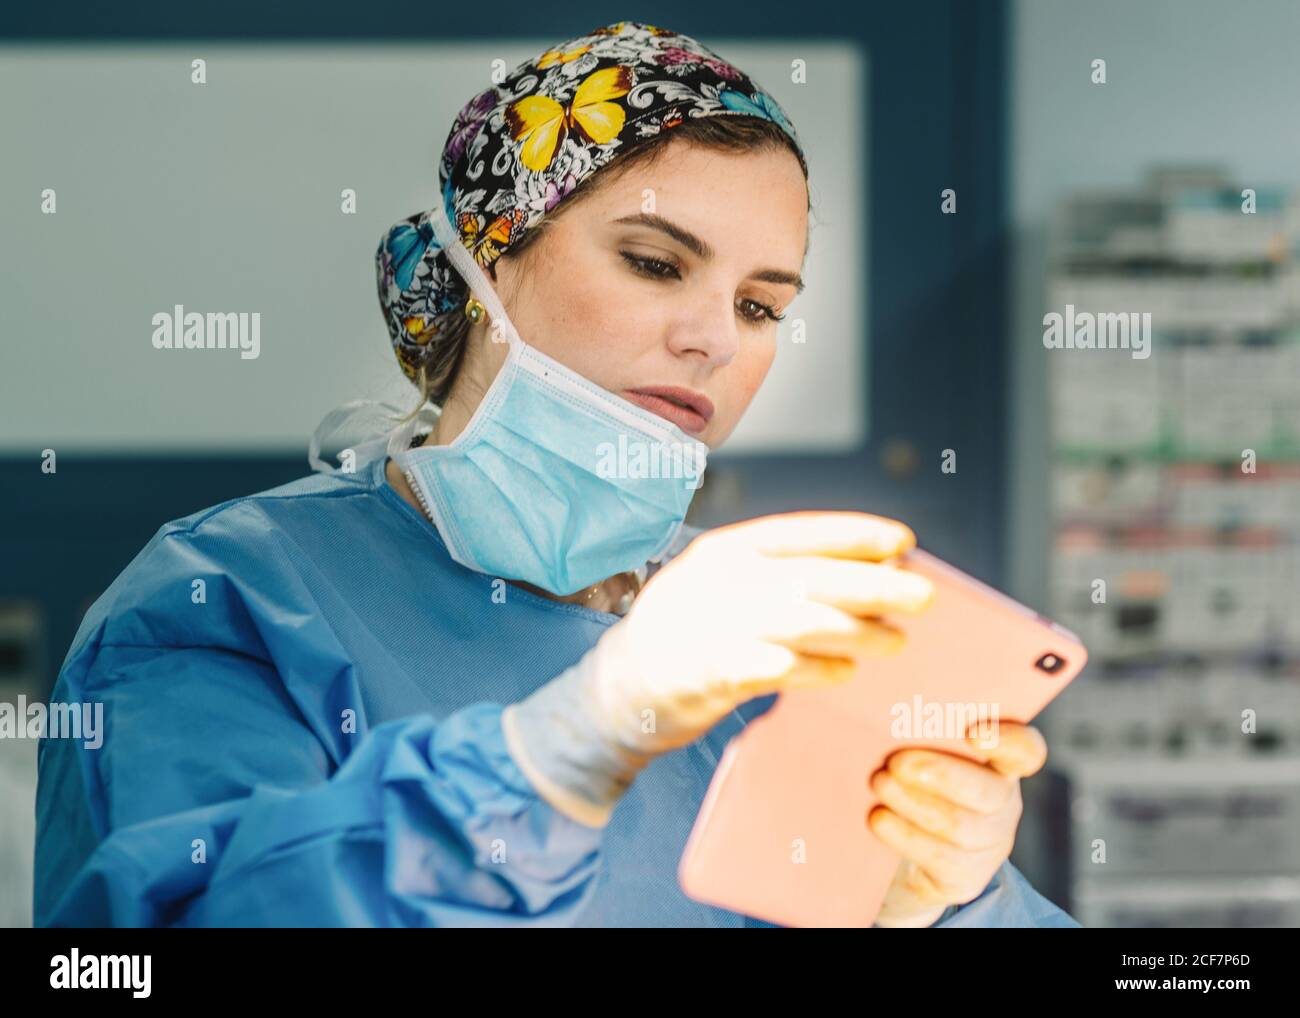 Beautiful Woman in surgical gown and mask taking photo and using mobile phone during operation Stock Photo